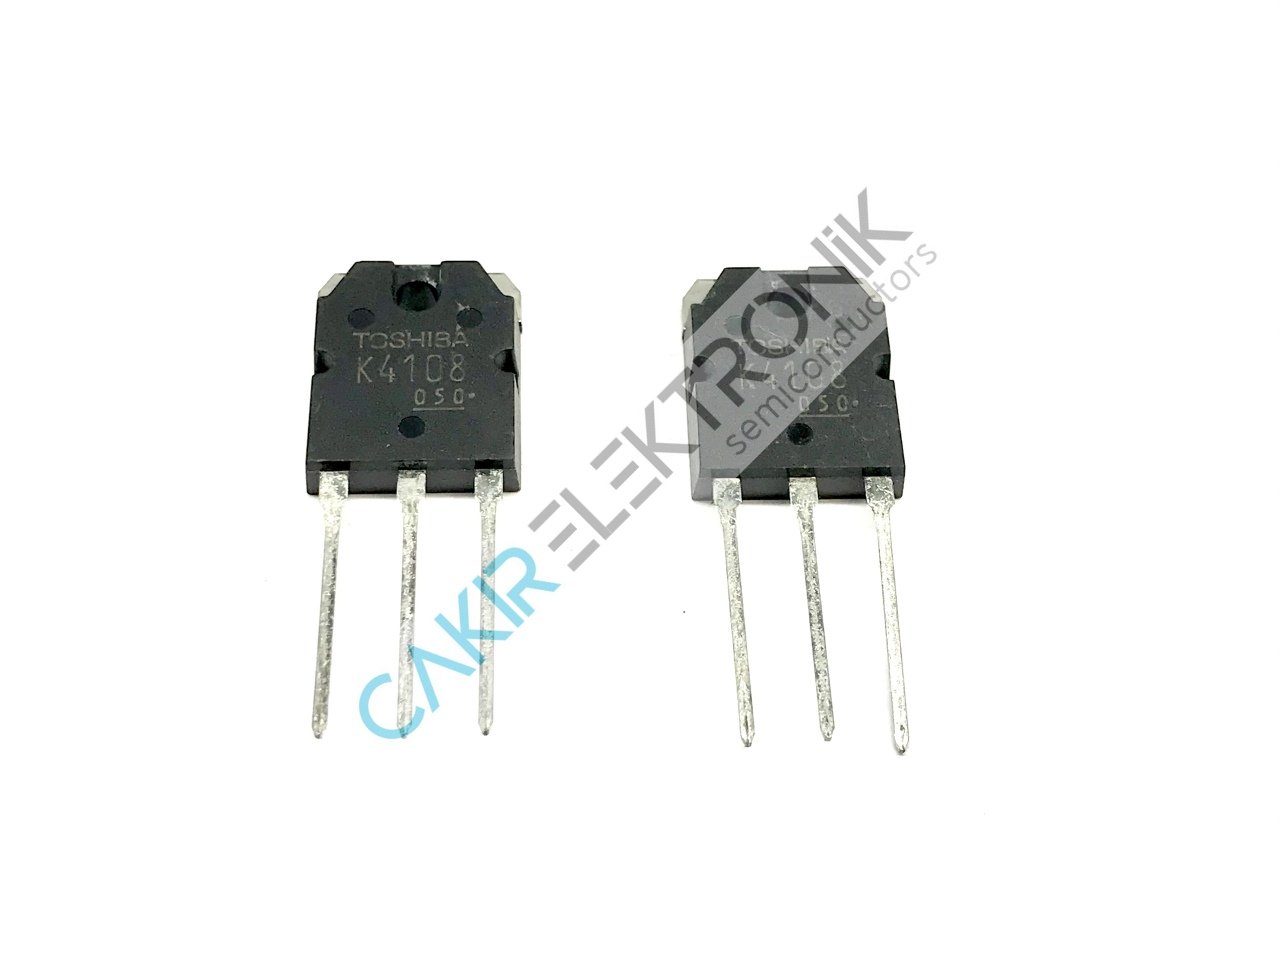 2SK4108 -  K4108 - 500V. 20A.  Silicon N-Channel MOS Type (π- MOSⅣ)